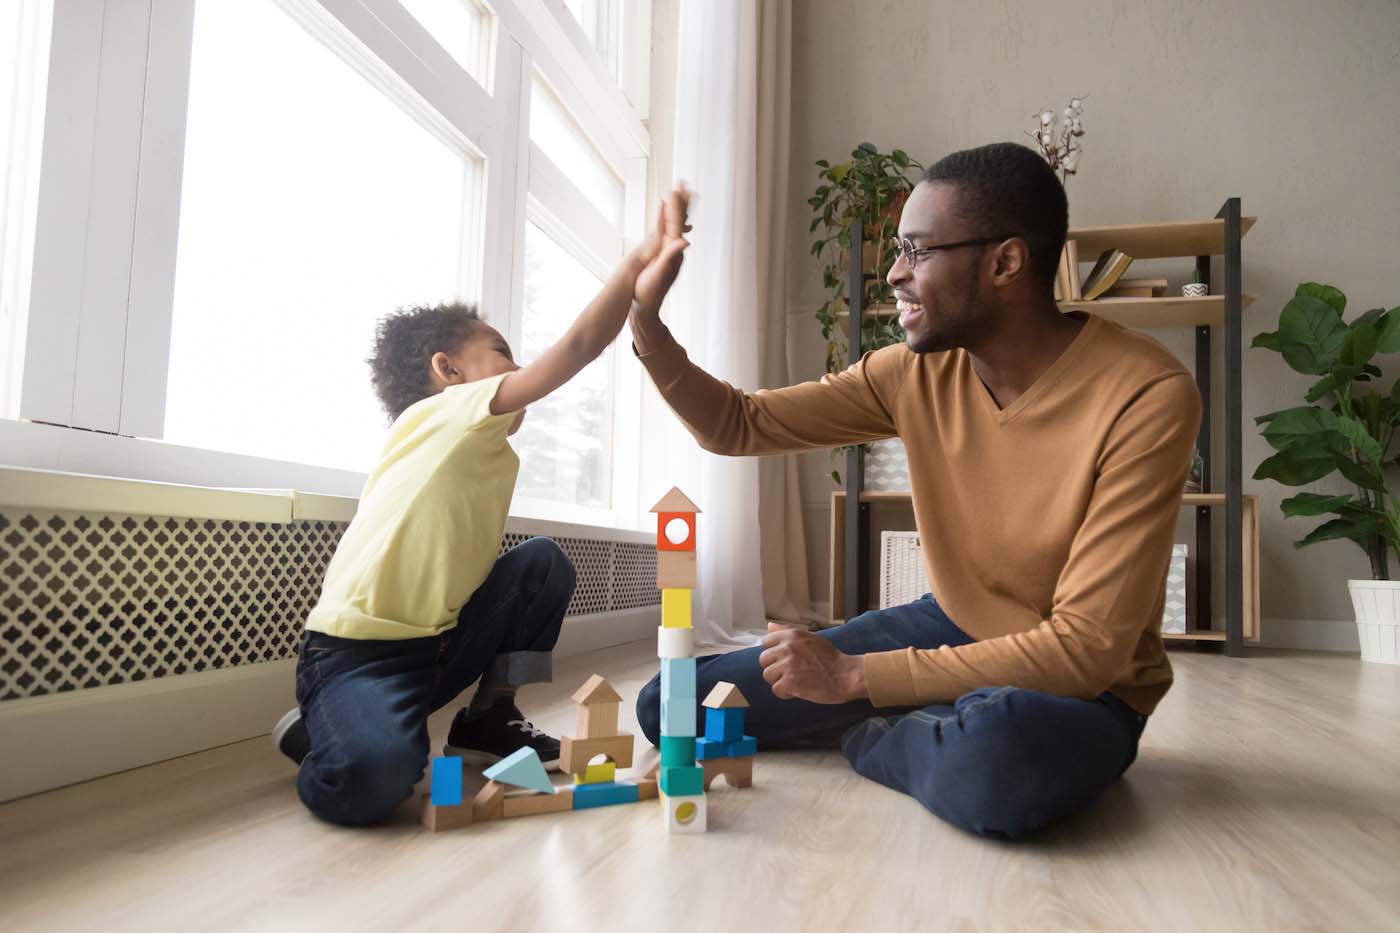 Father and preschooler son sit on the floor and play with building blocks at home. They are high-fiving.